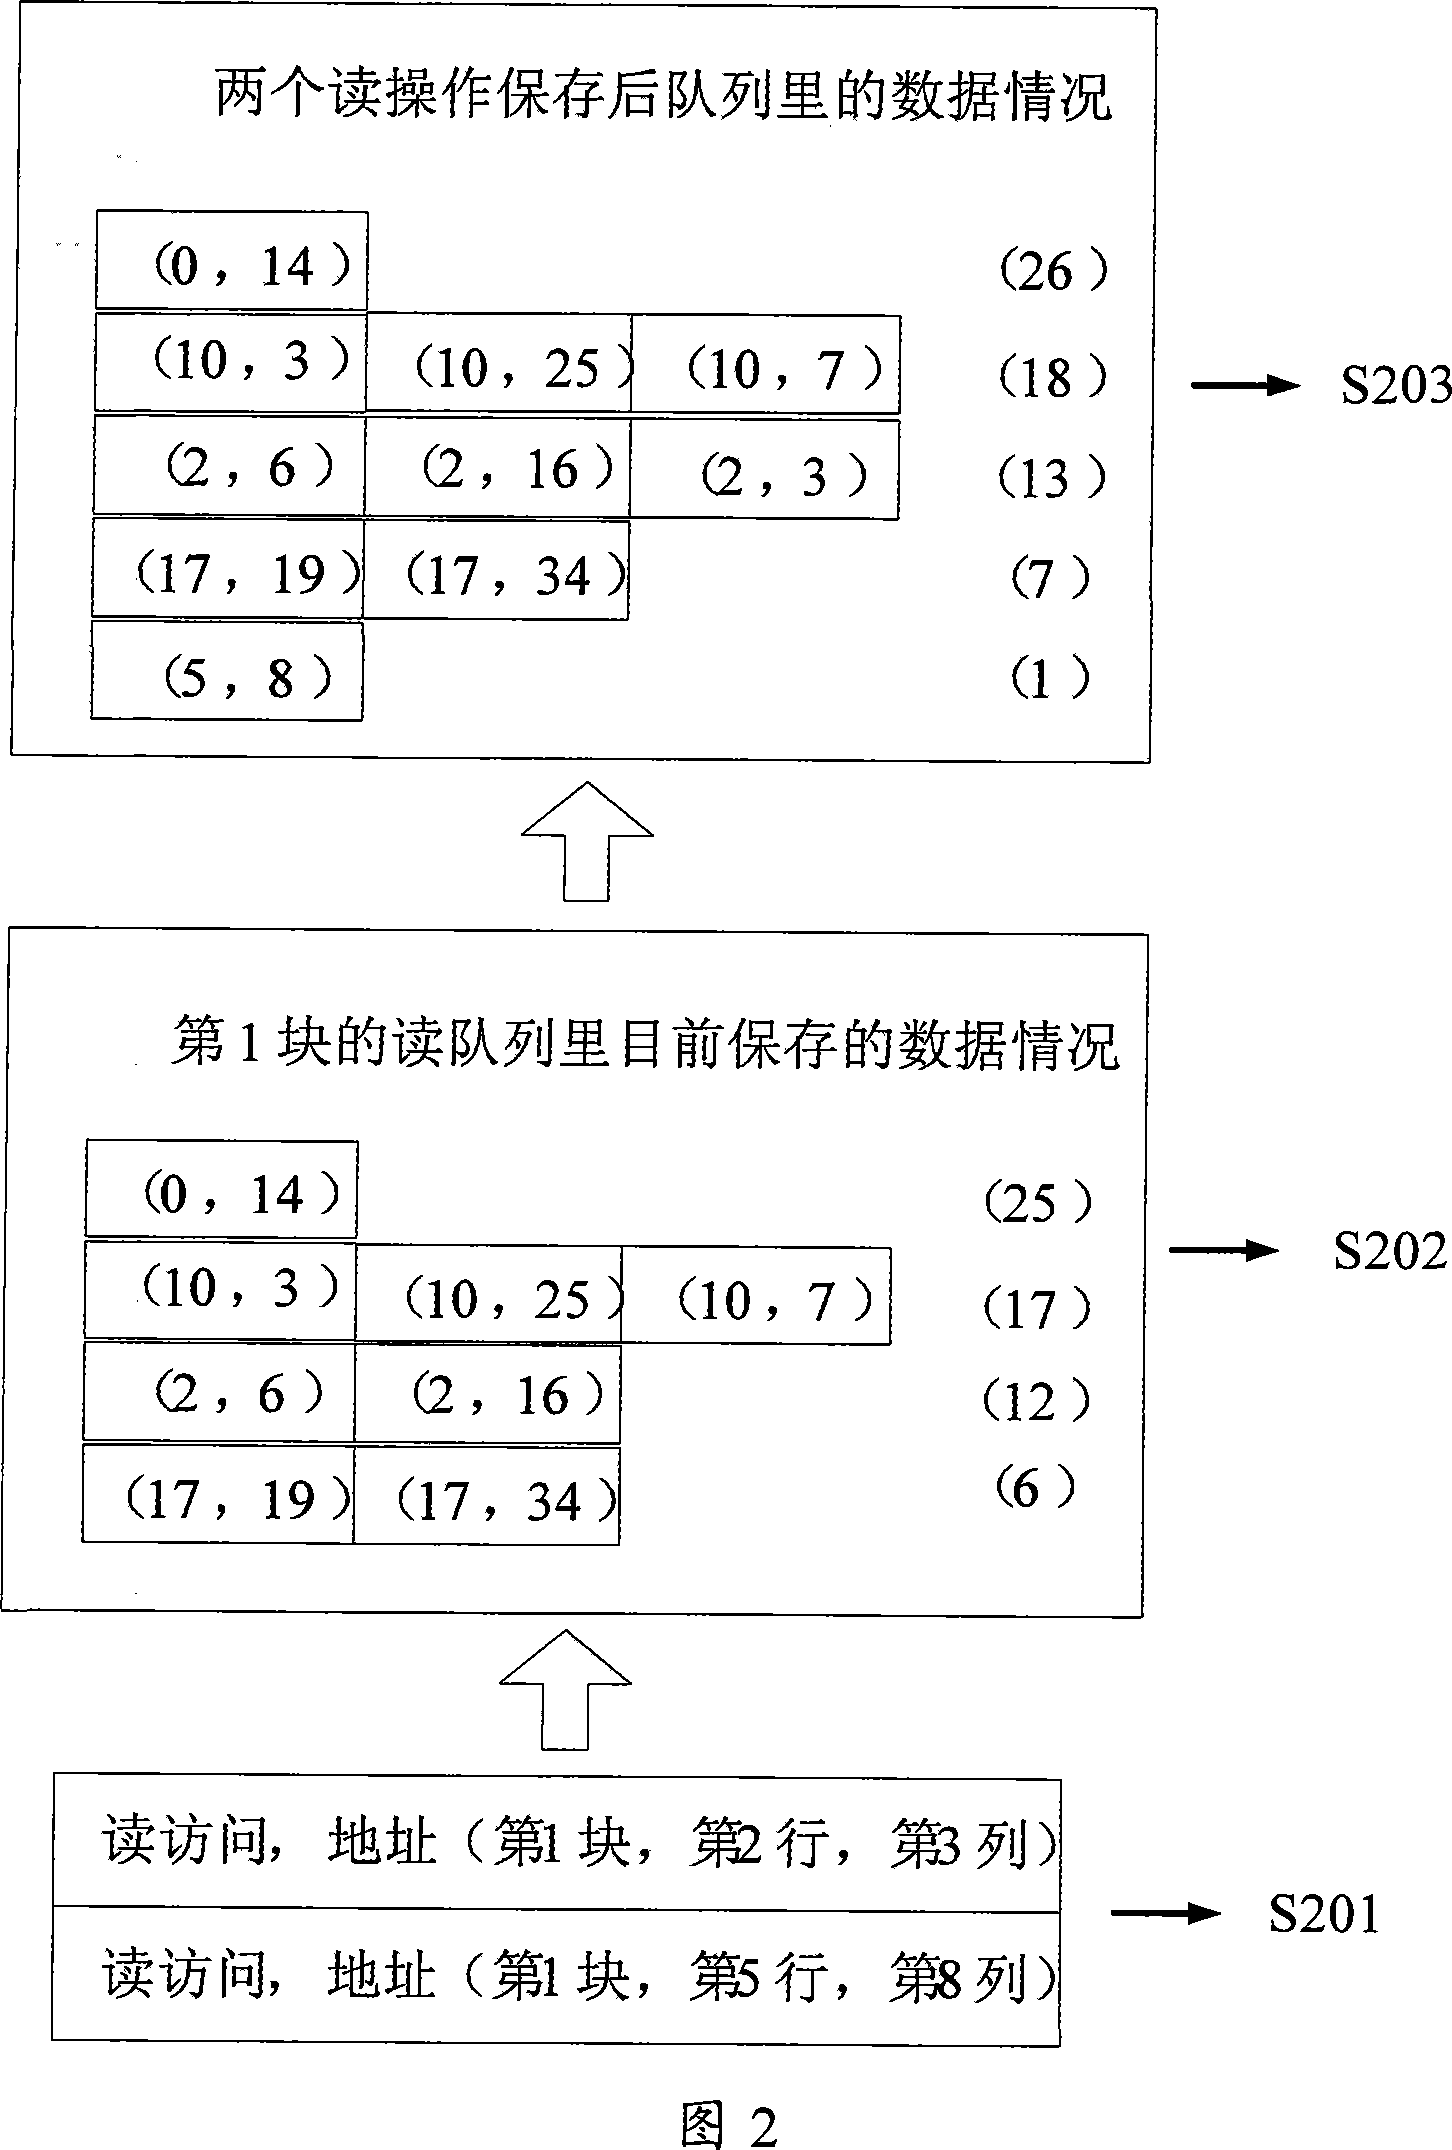 Outburst disorder based memory controller, system and its access scheduling method